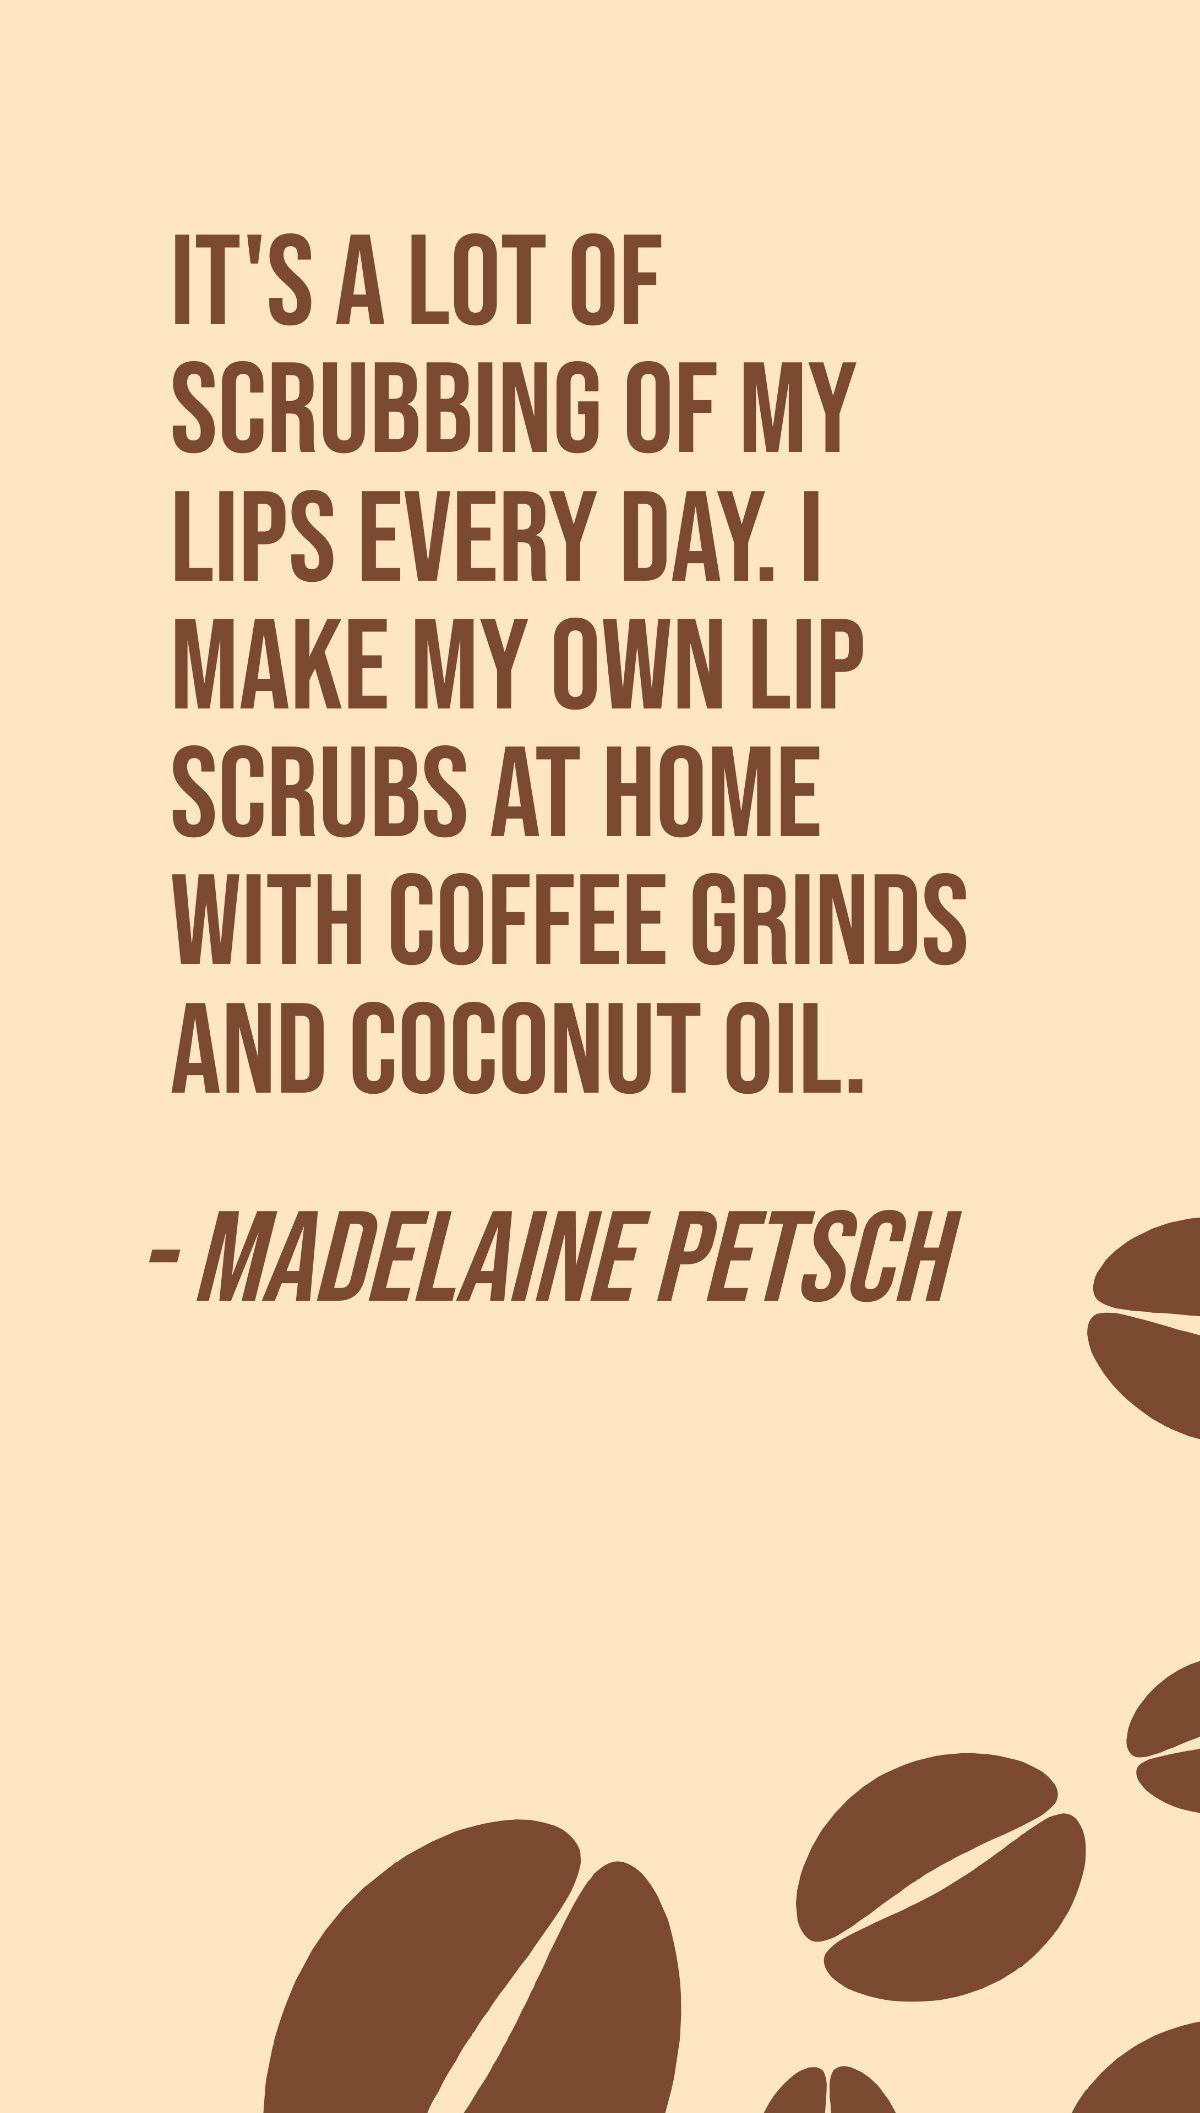 Madelaine Petsch - It's a lot of scrubbing of my lips every day. I make my own lip scrubs at home with coffee grinds and coconut oil.